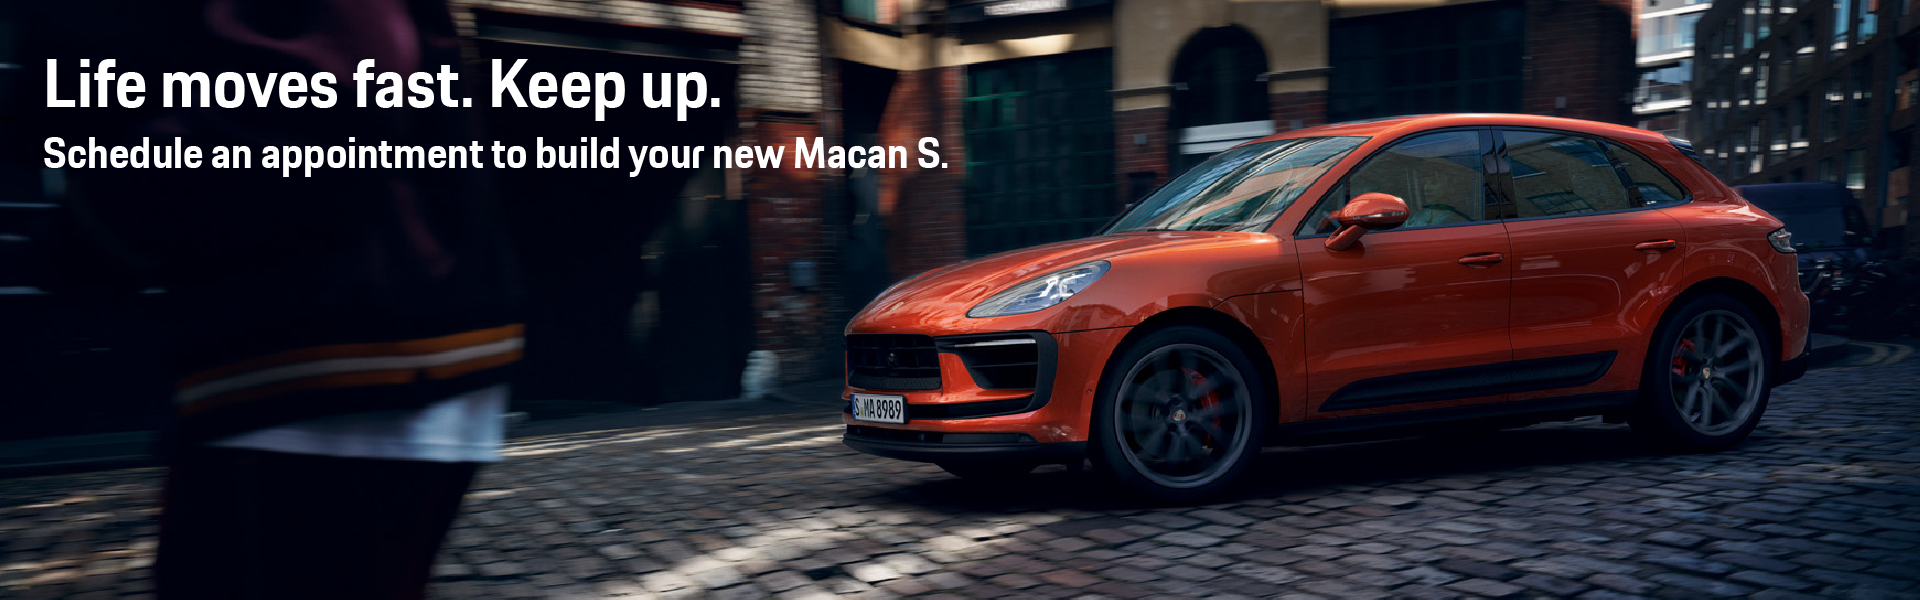 Schedule an appointment to build your new Macan at Porsche West Broward